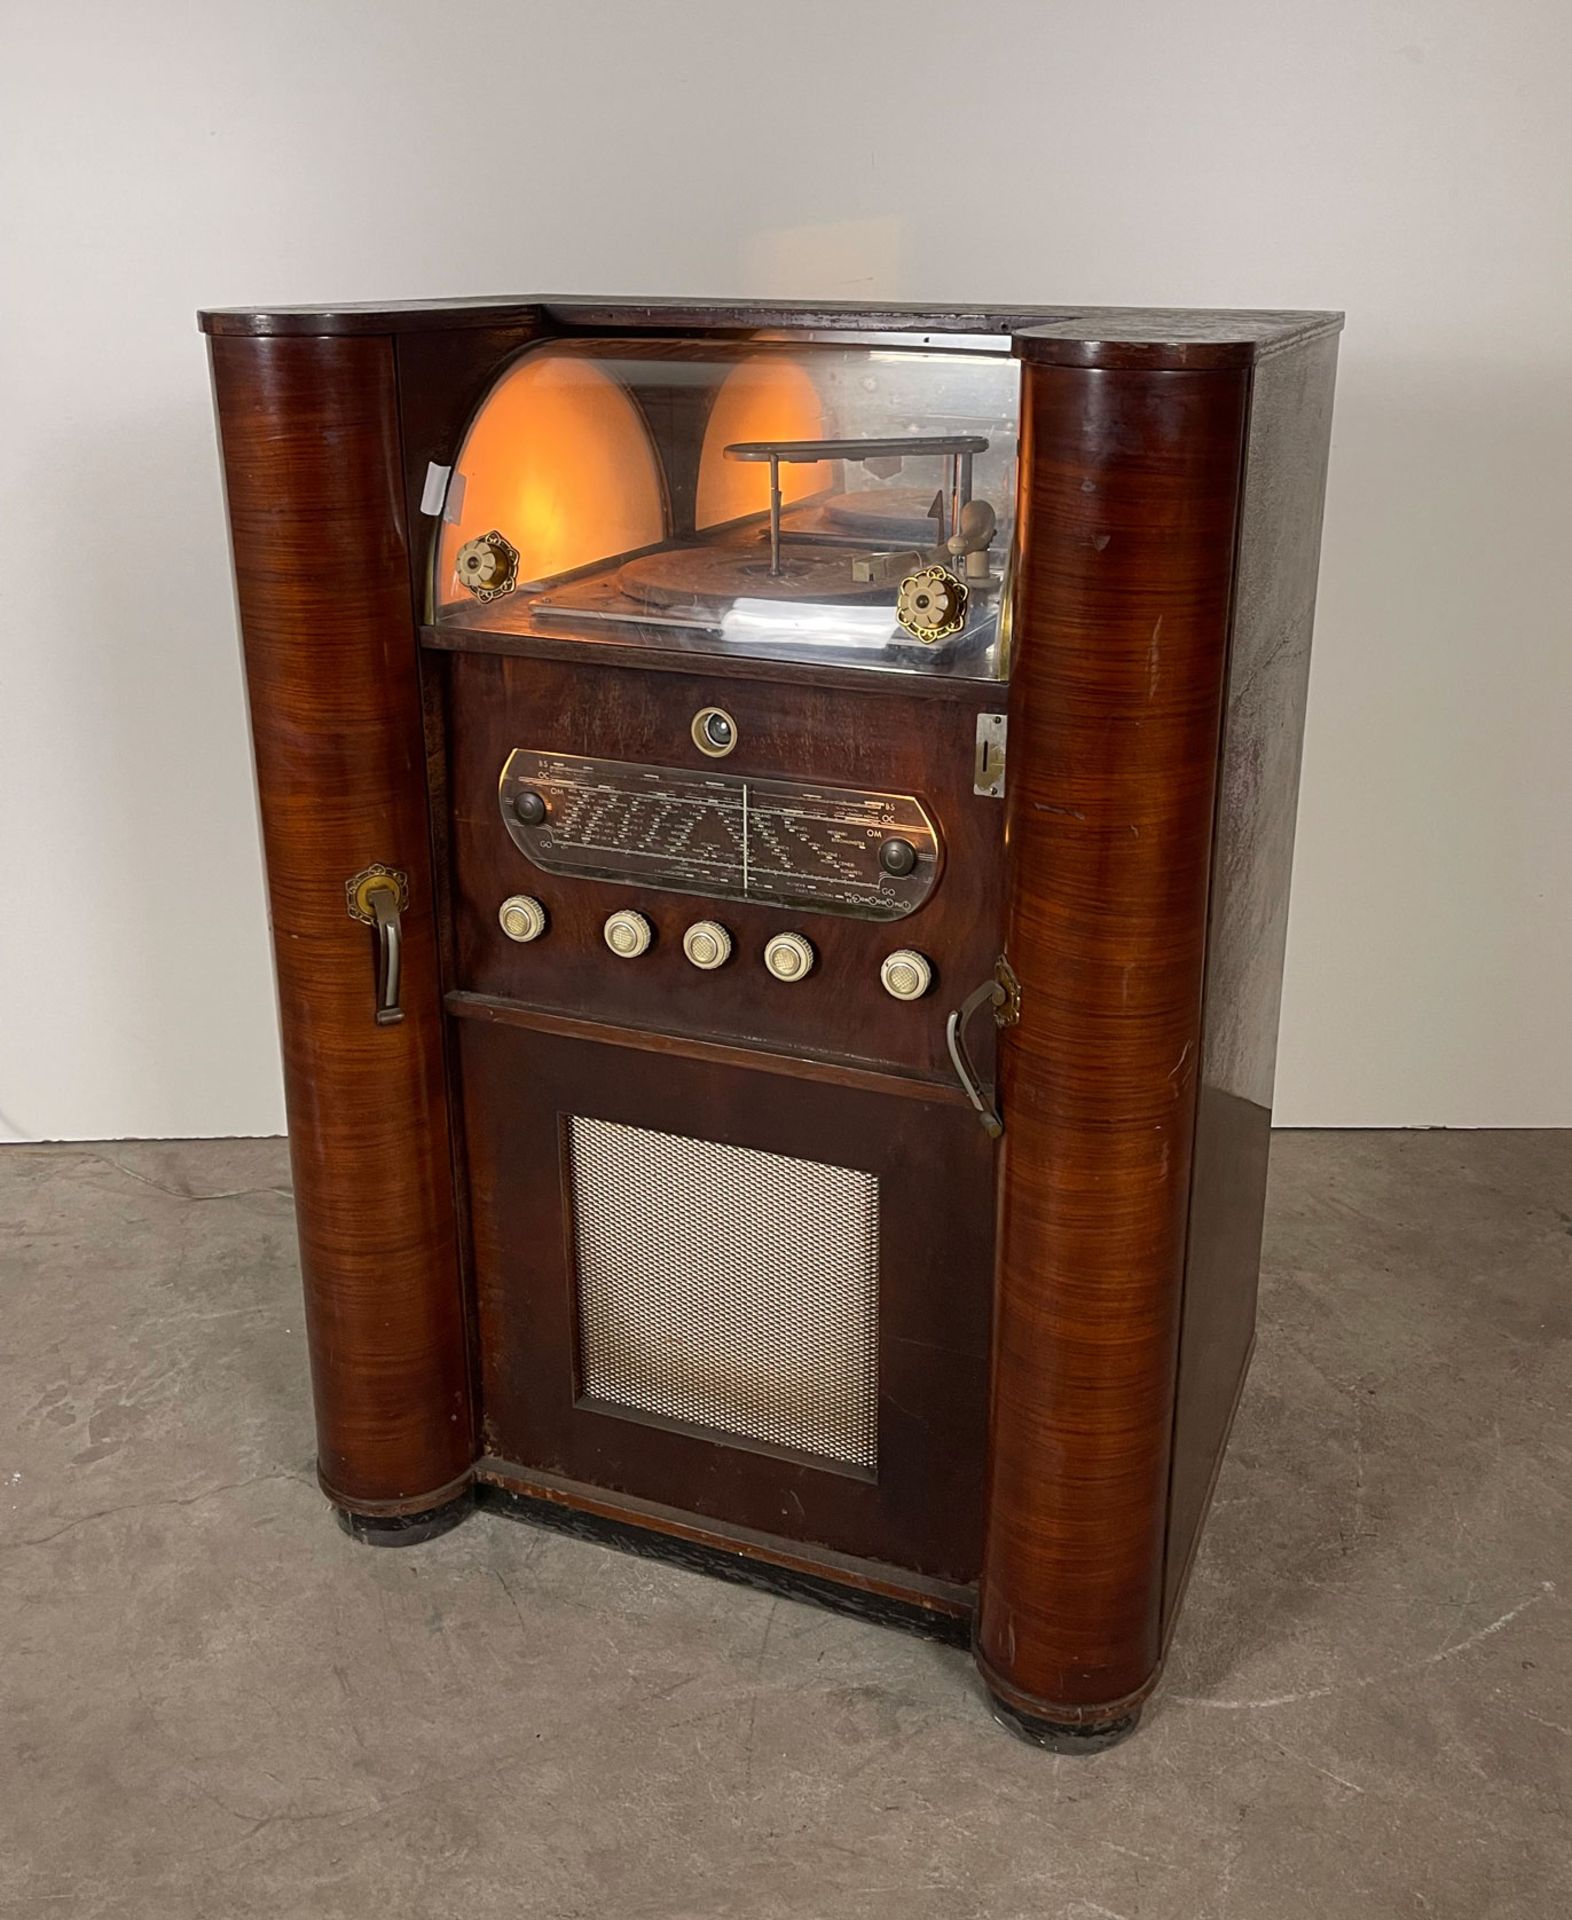 Mid-Fifties Valcke Heule Belgian Coin-Op Radio & Record Player - Image 2 of 15